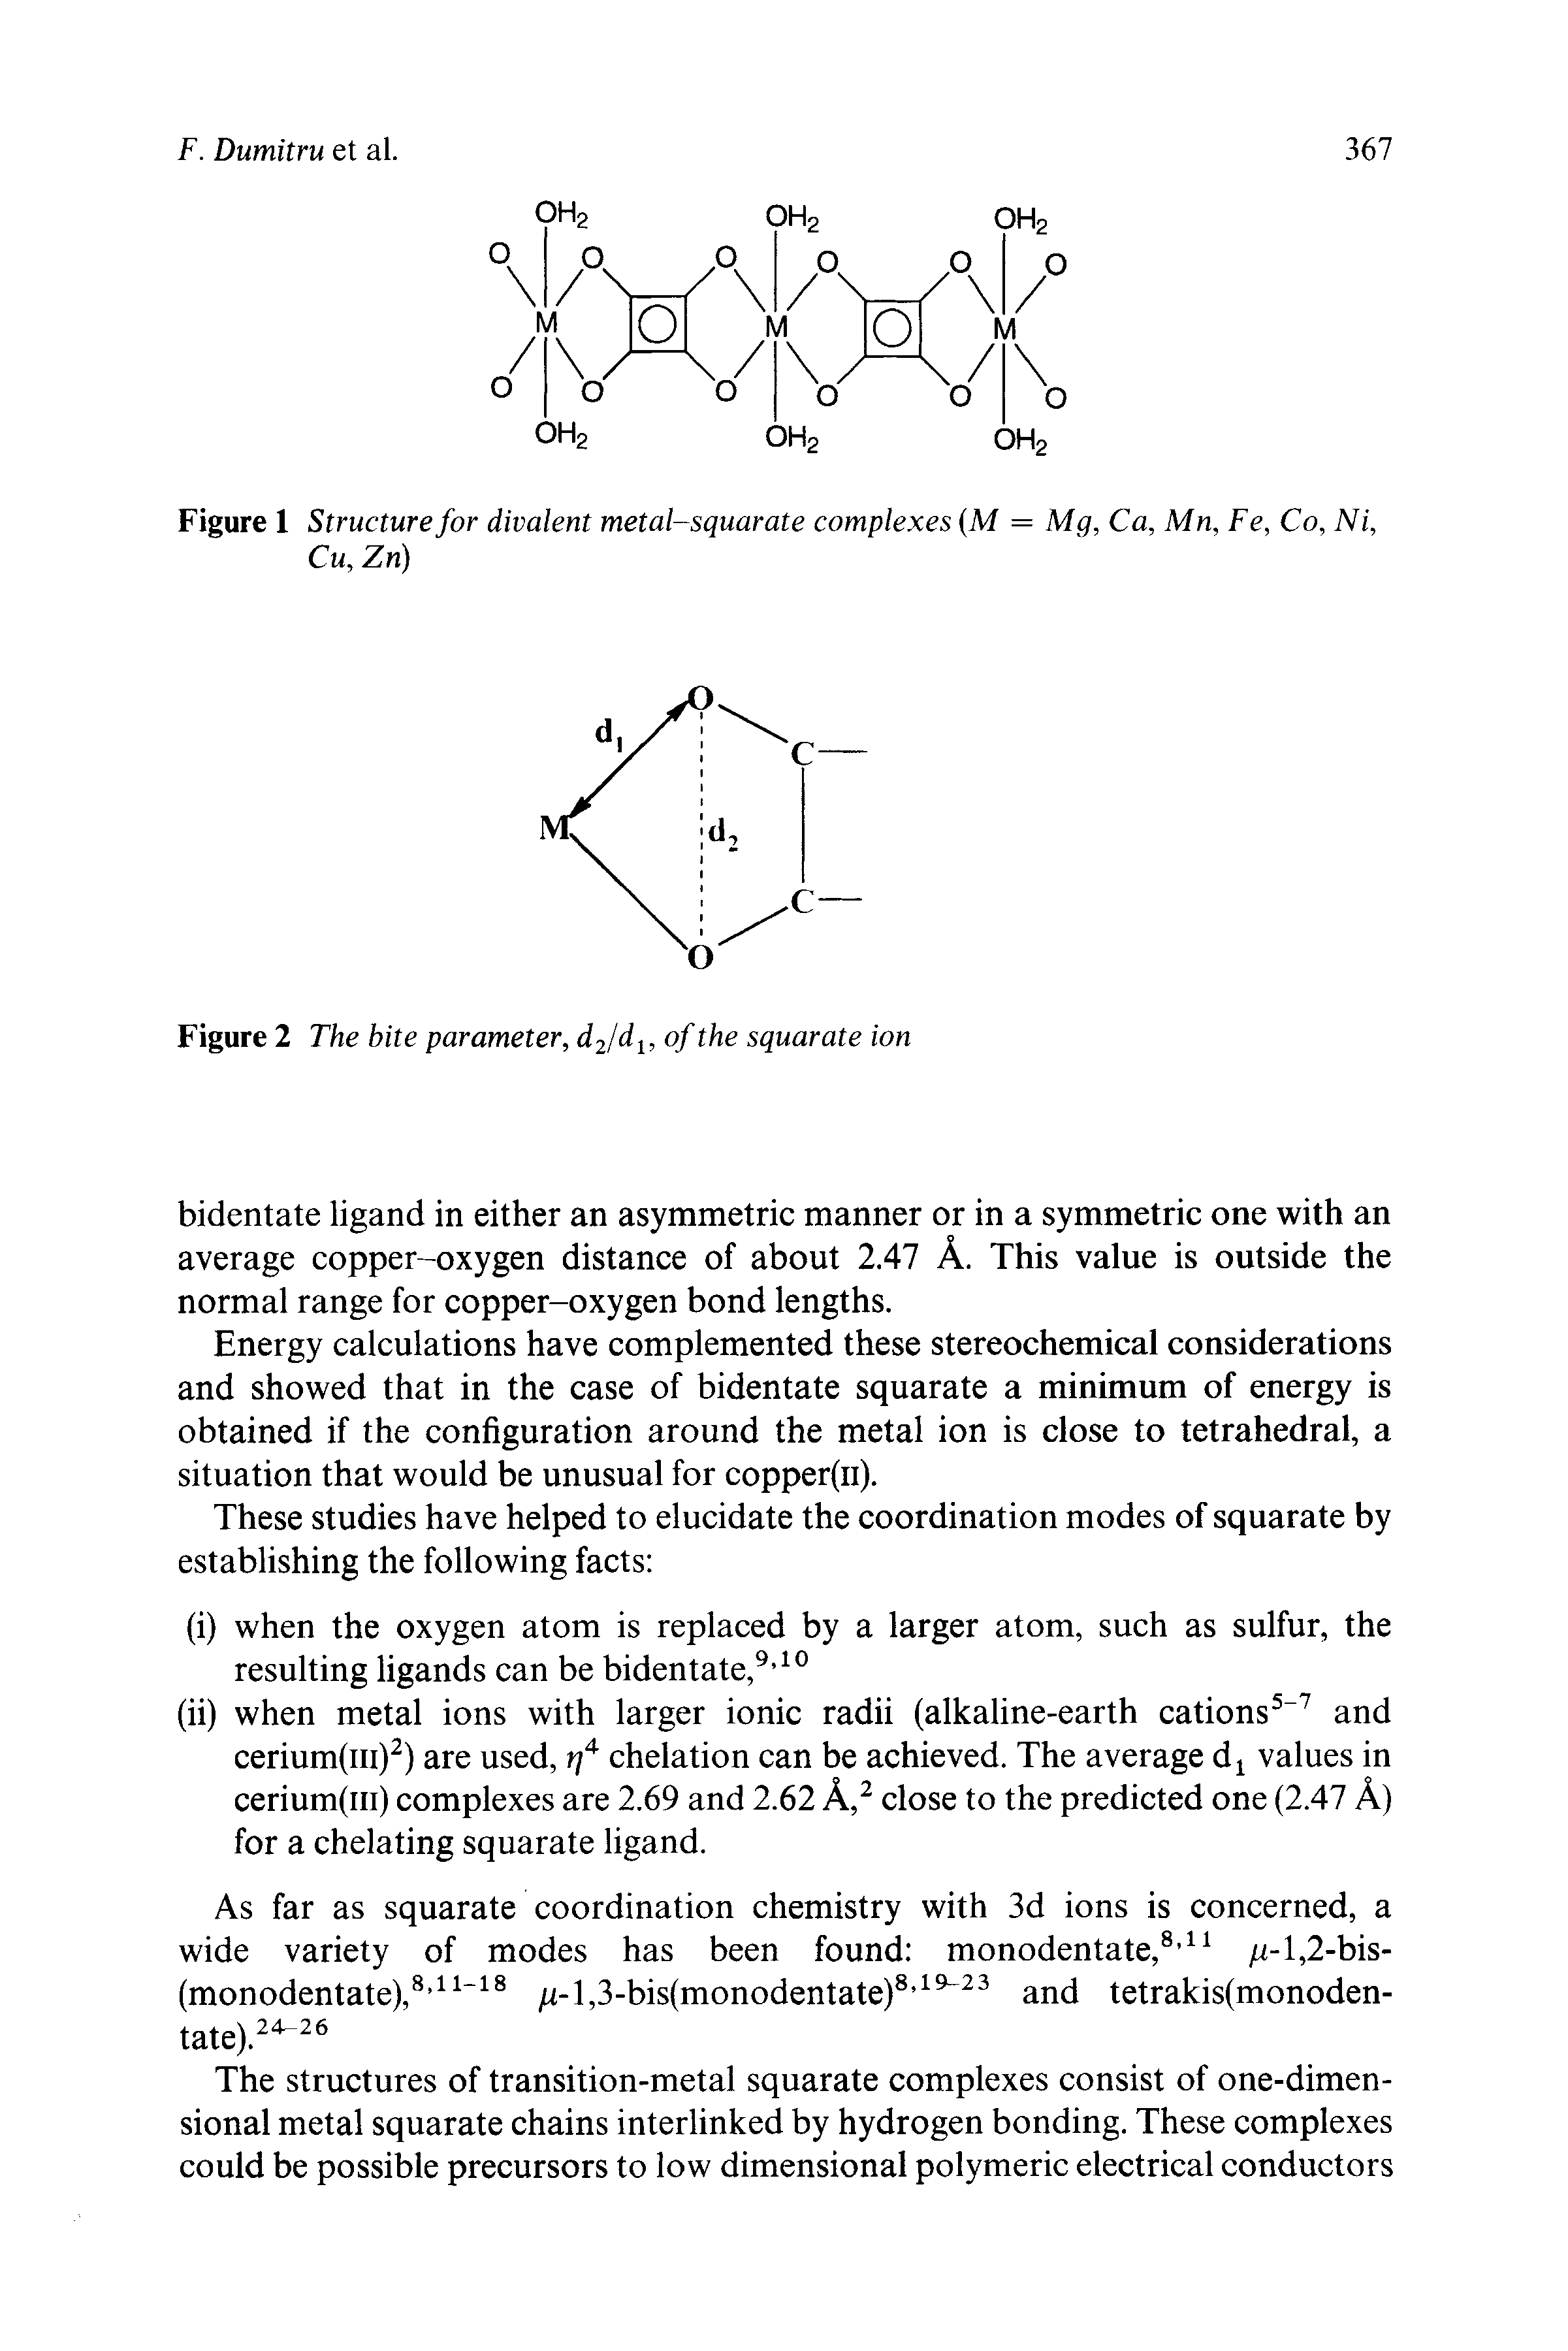 Figure 1 Structure for divalent metal-squarate complexes (M = Mg, Ca, Mn, Fe, Co, Ni, Cu, Zn)...